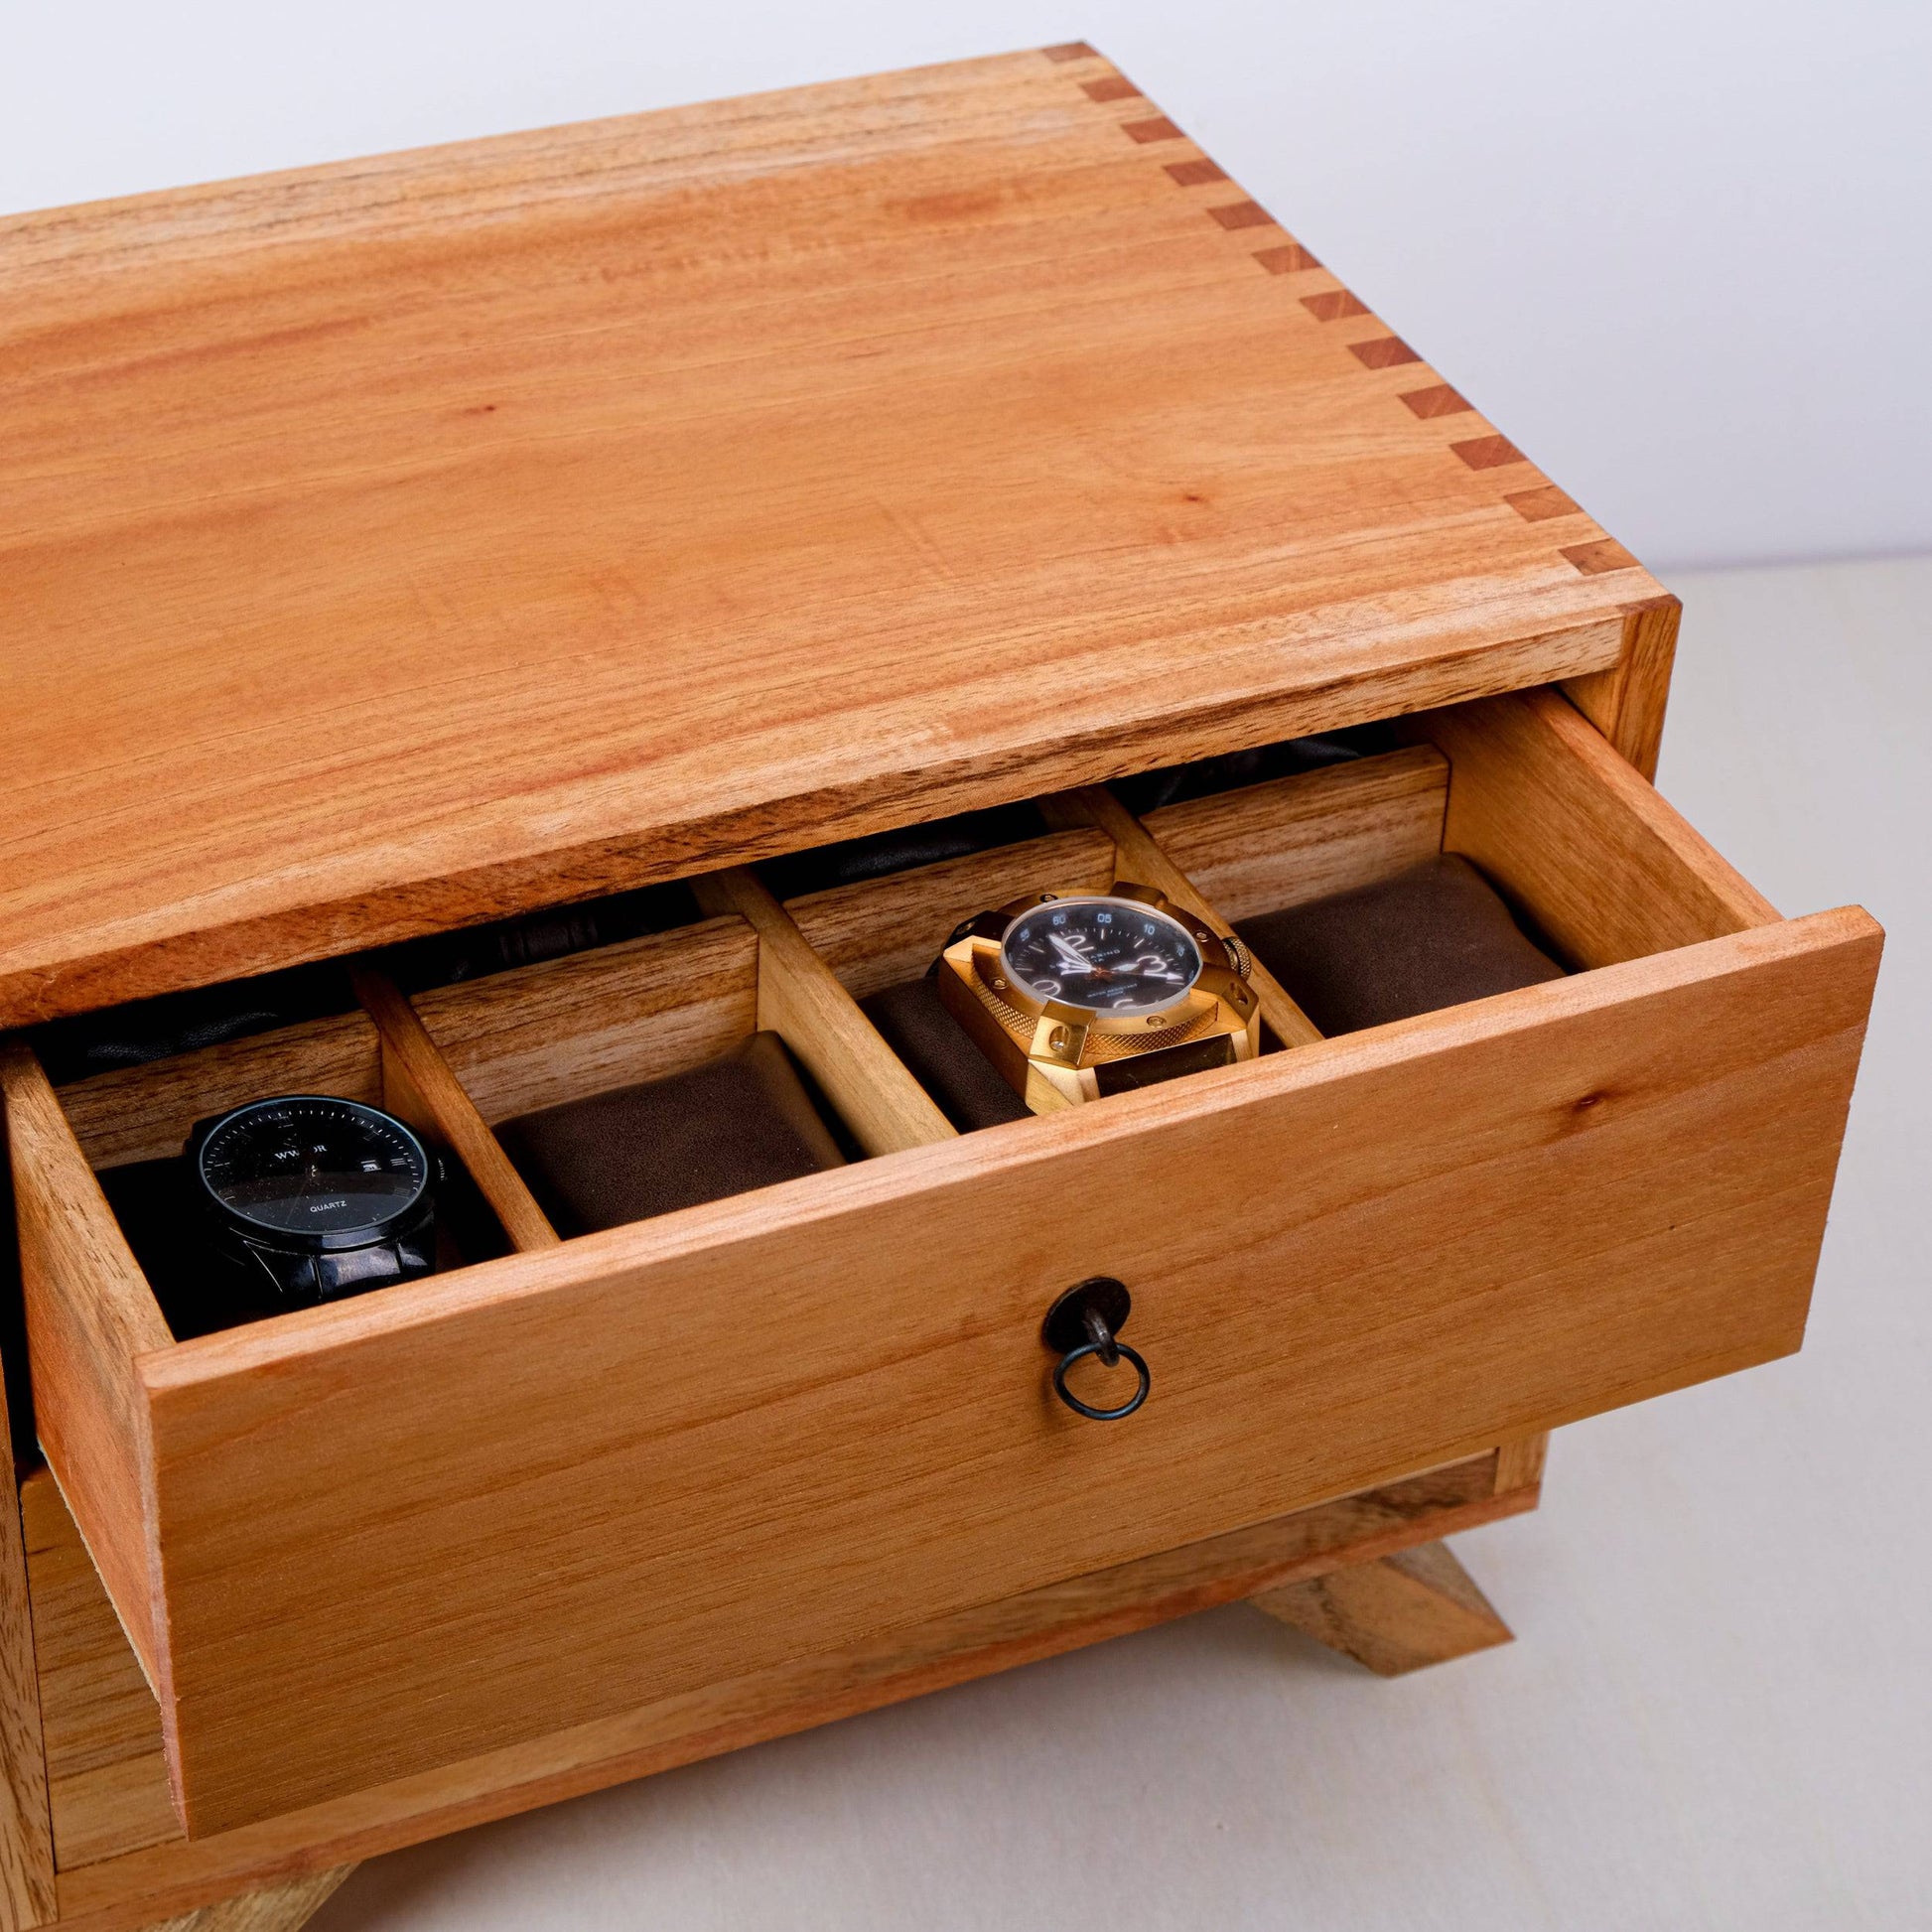 watch: Midcentury-style wooden sewing box - Retro to Go